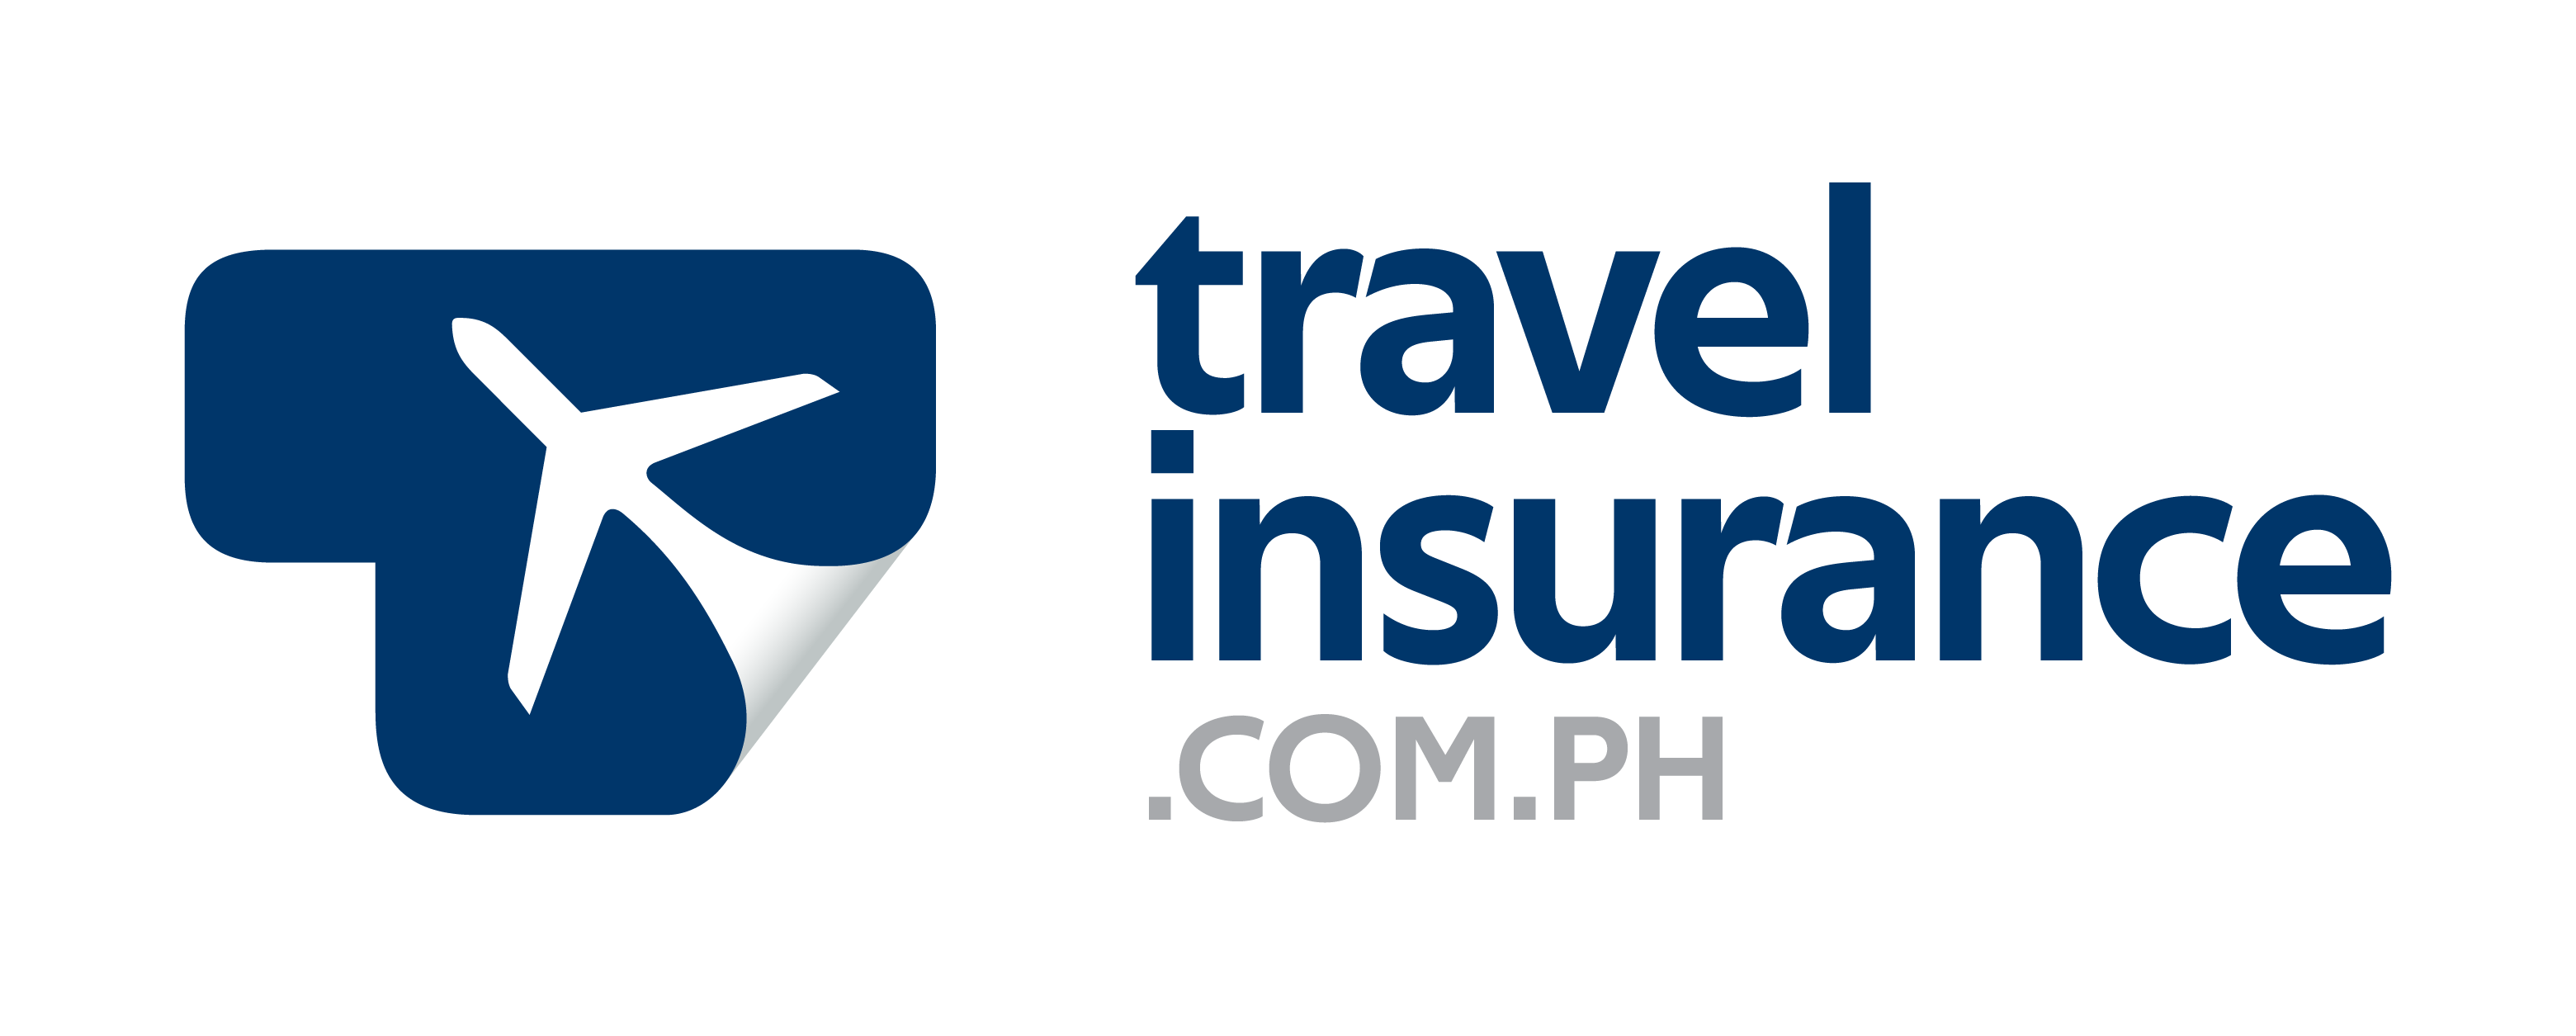 travel insurance to usa from philippines